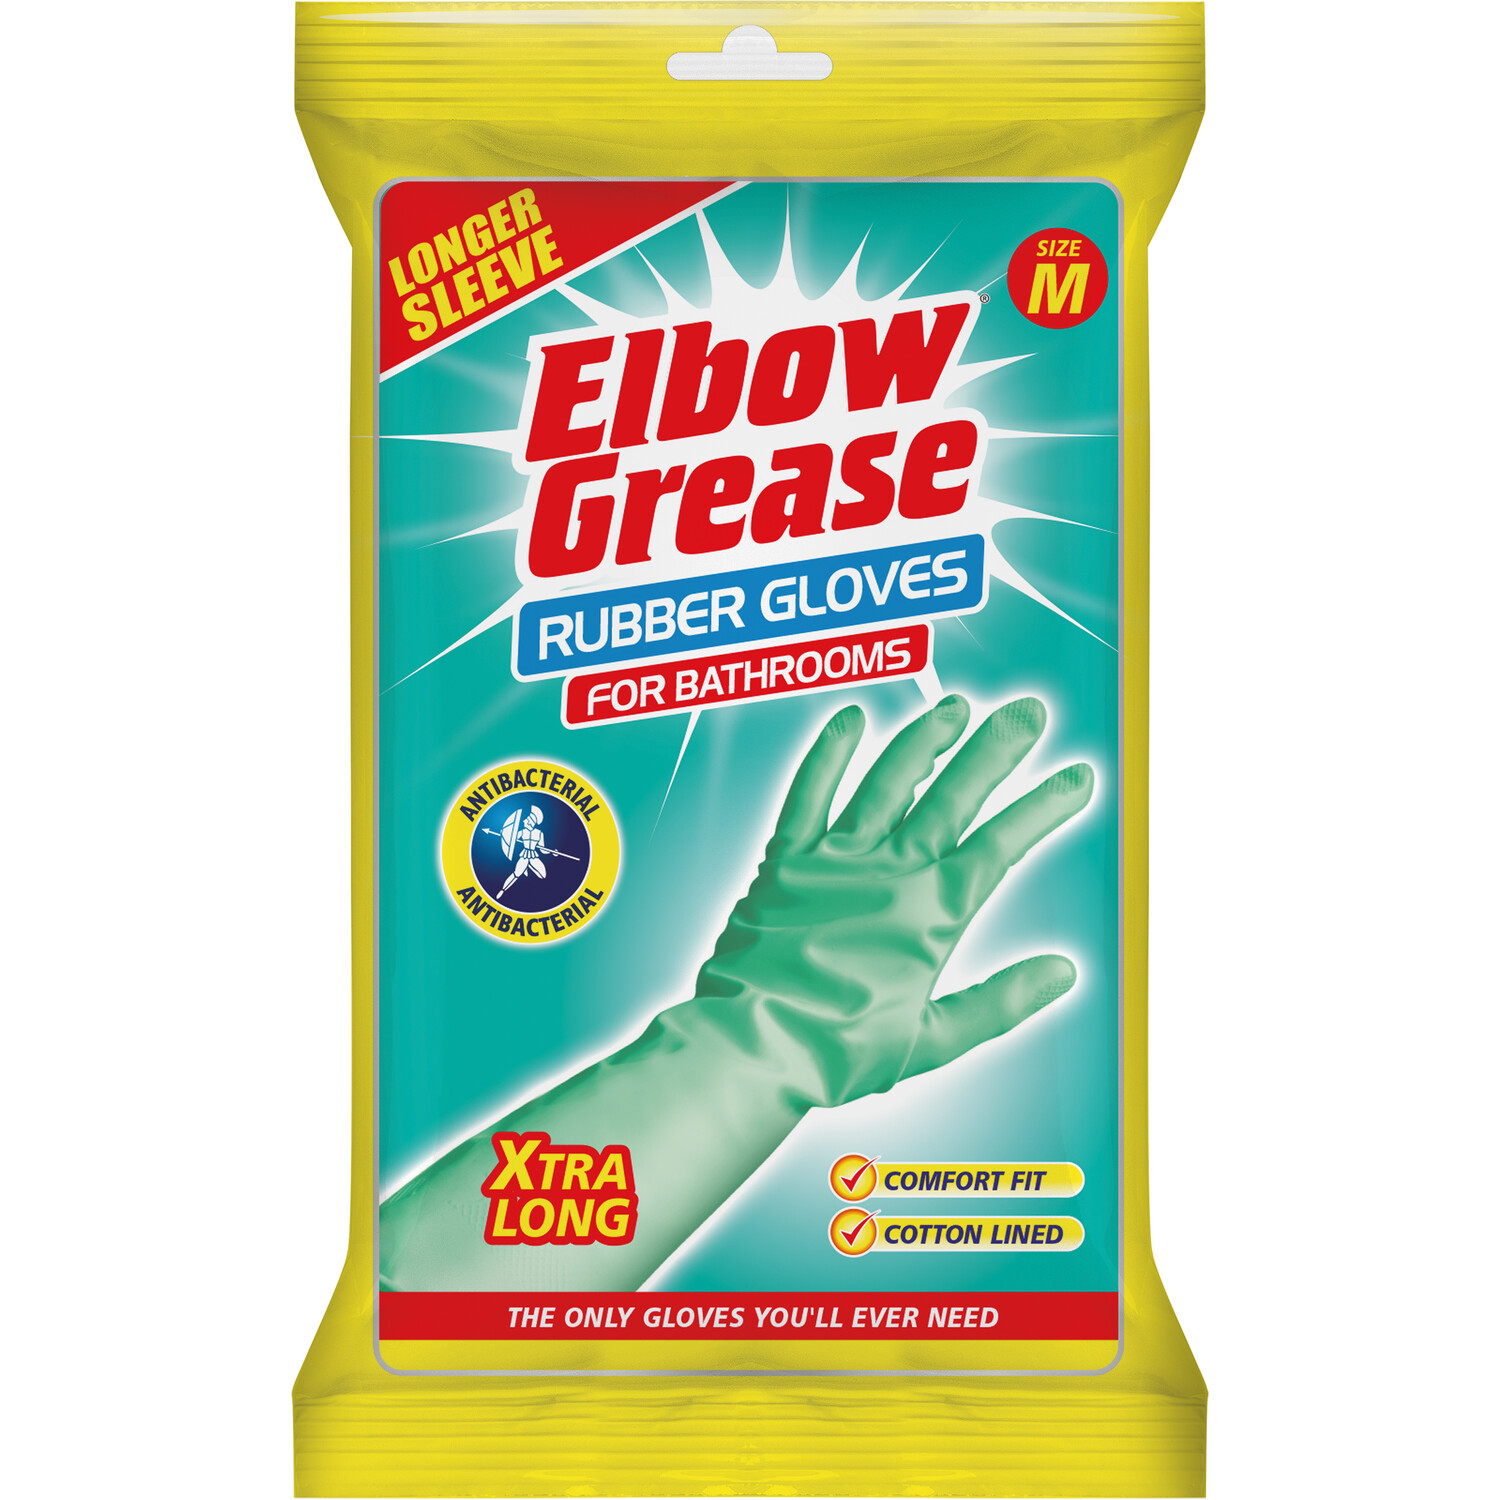 Elbow Grease Rubber Gloves for Bathrooms - Blue Image 1